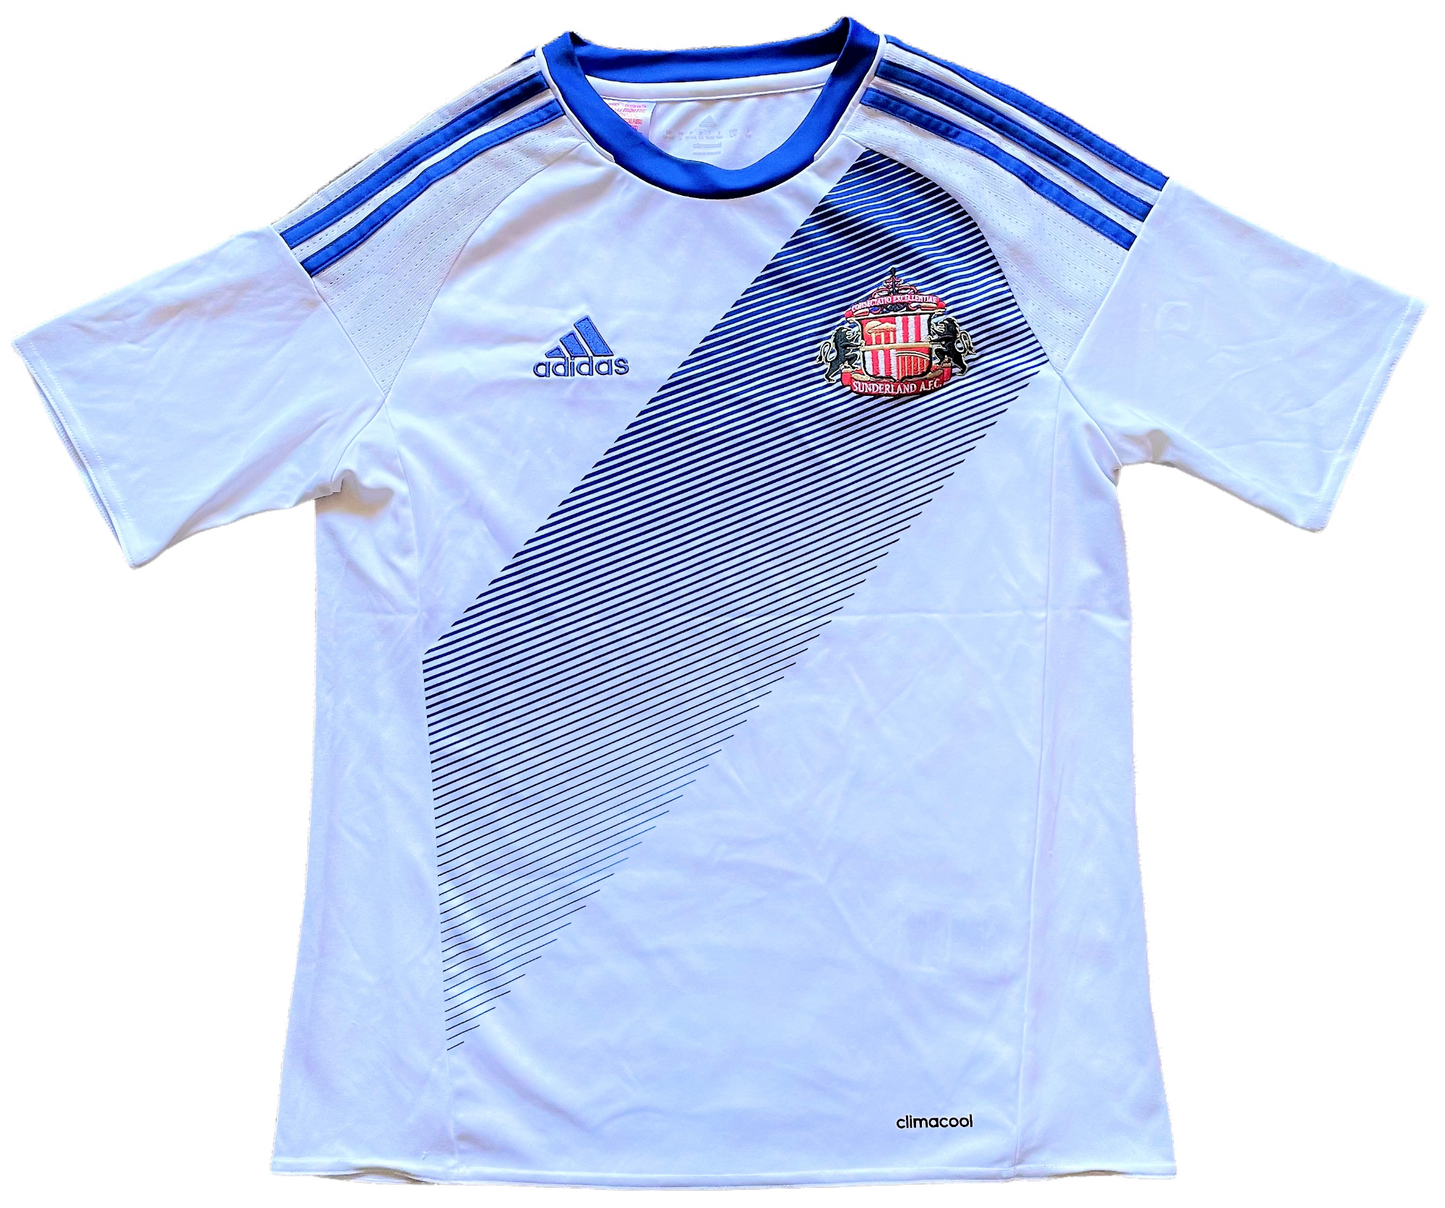 2016-17 Sunderland Away Shirt (excellent) 13 to 14 years